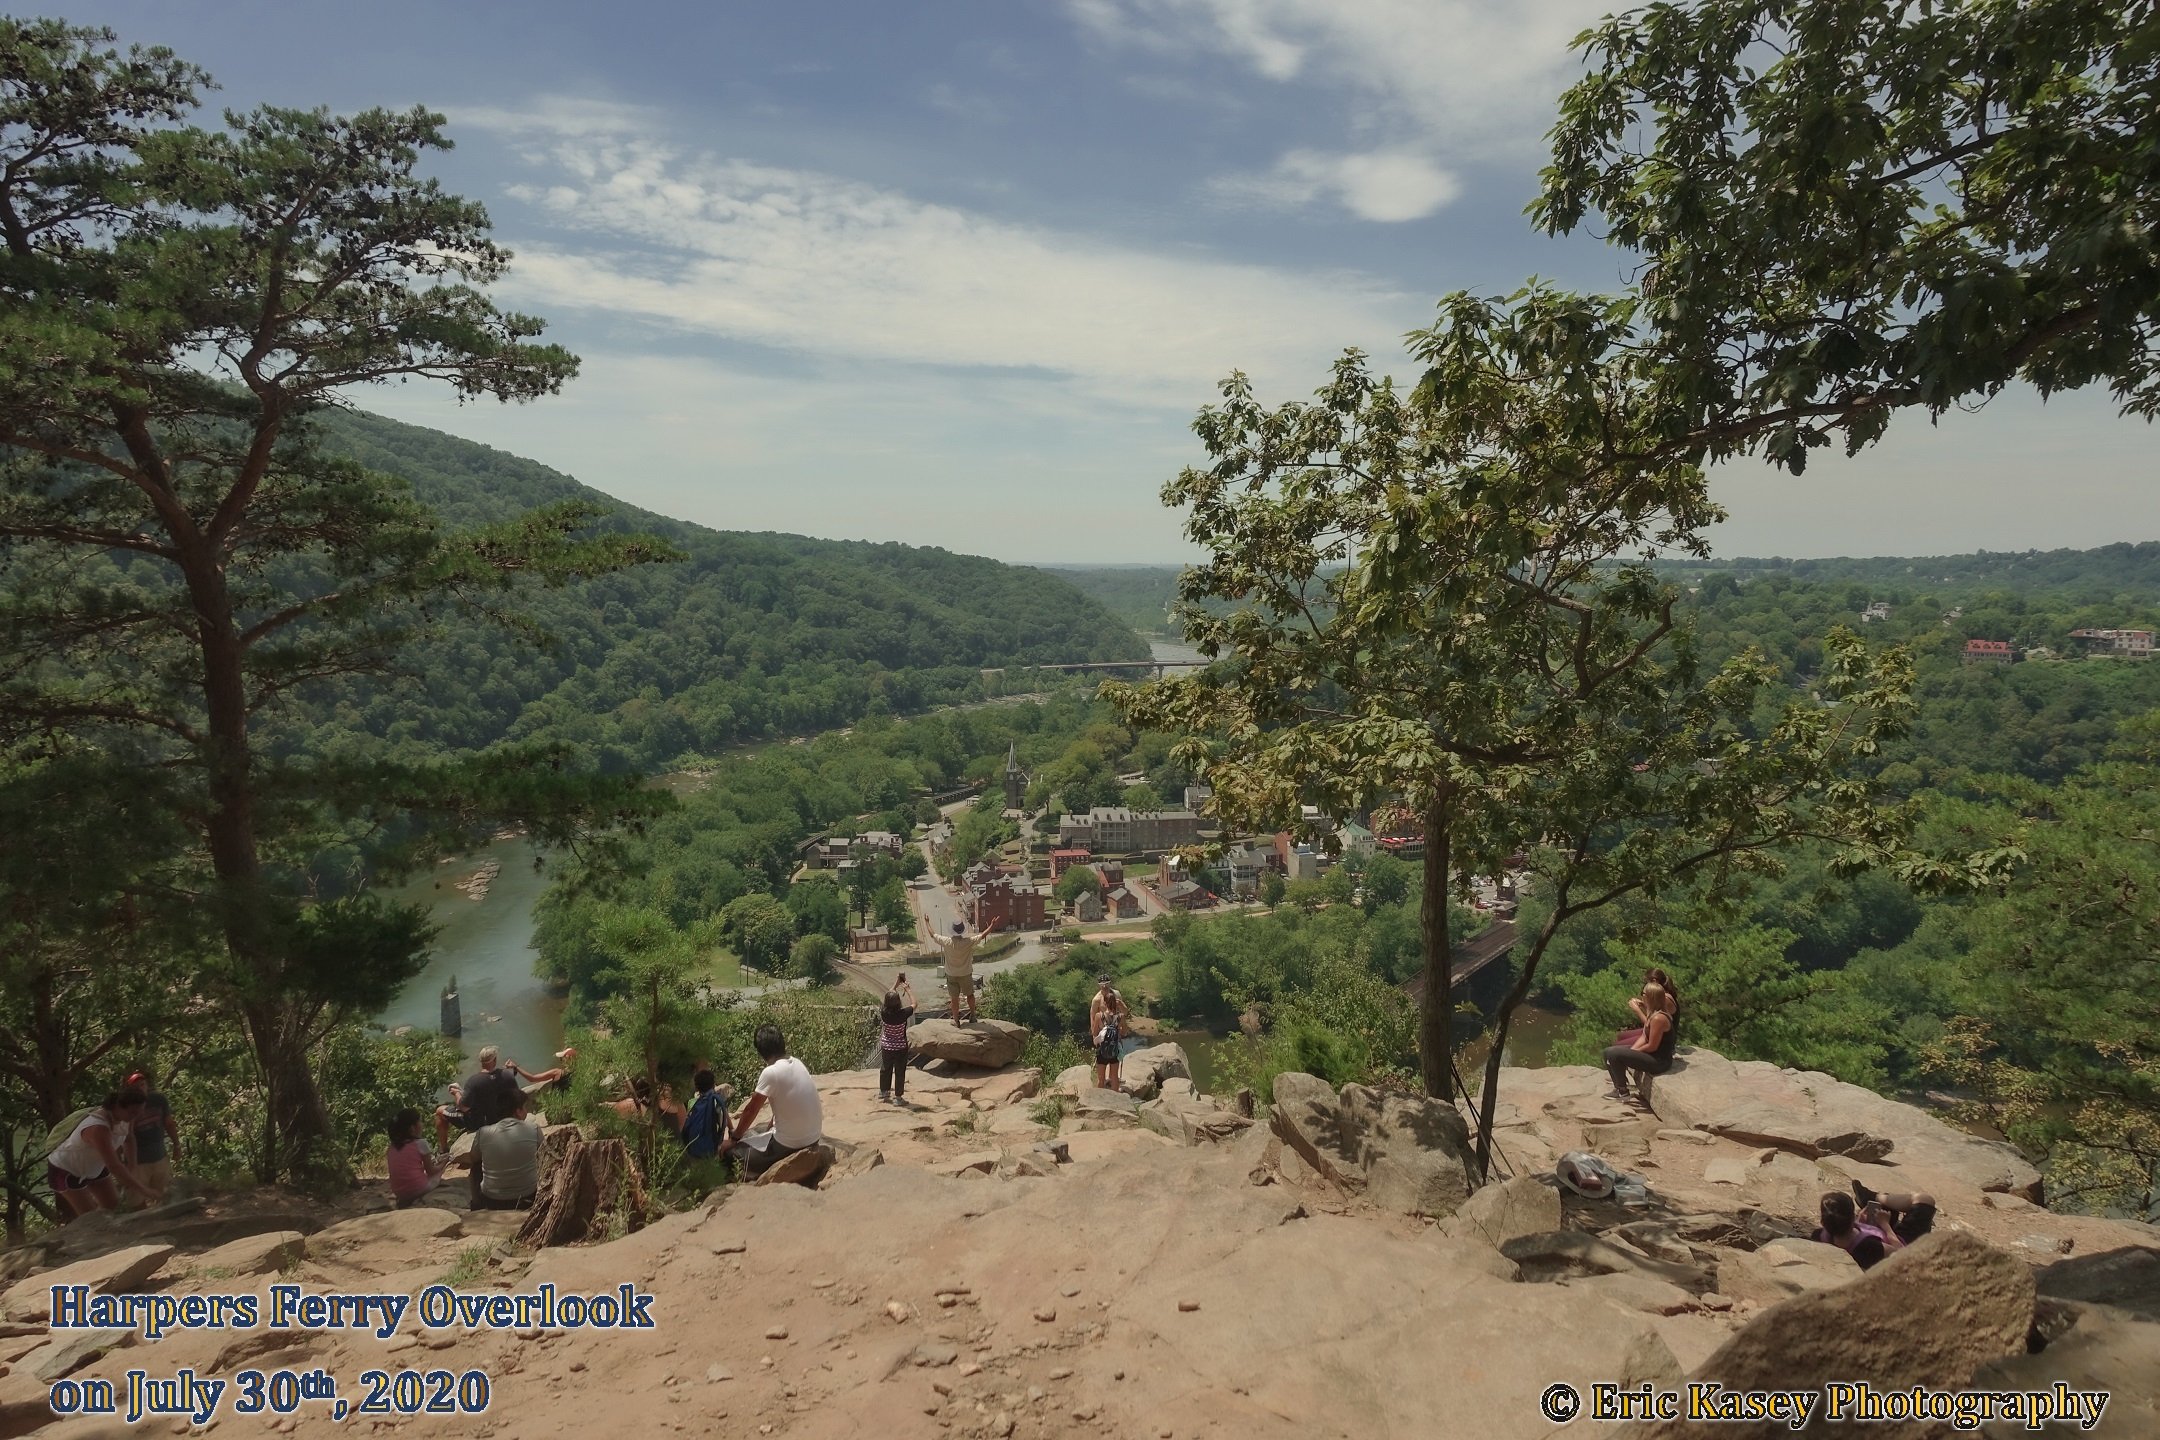 51 - Harpers Ferry Overlook on July 30th, 2020.JPG